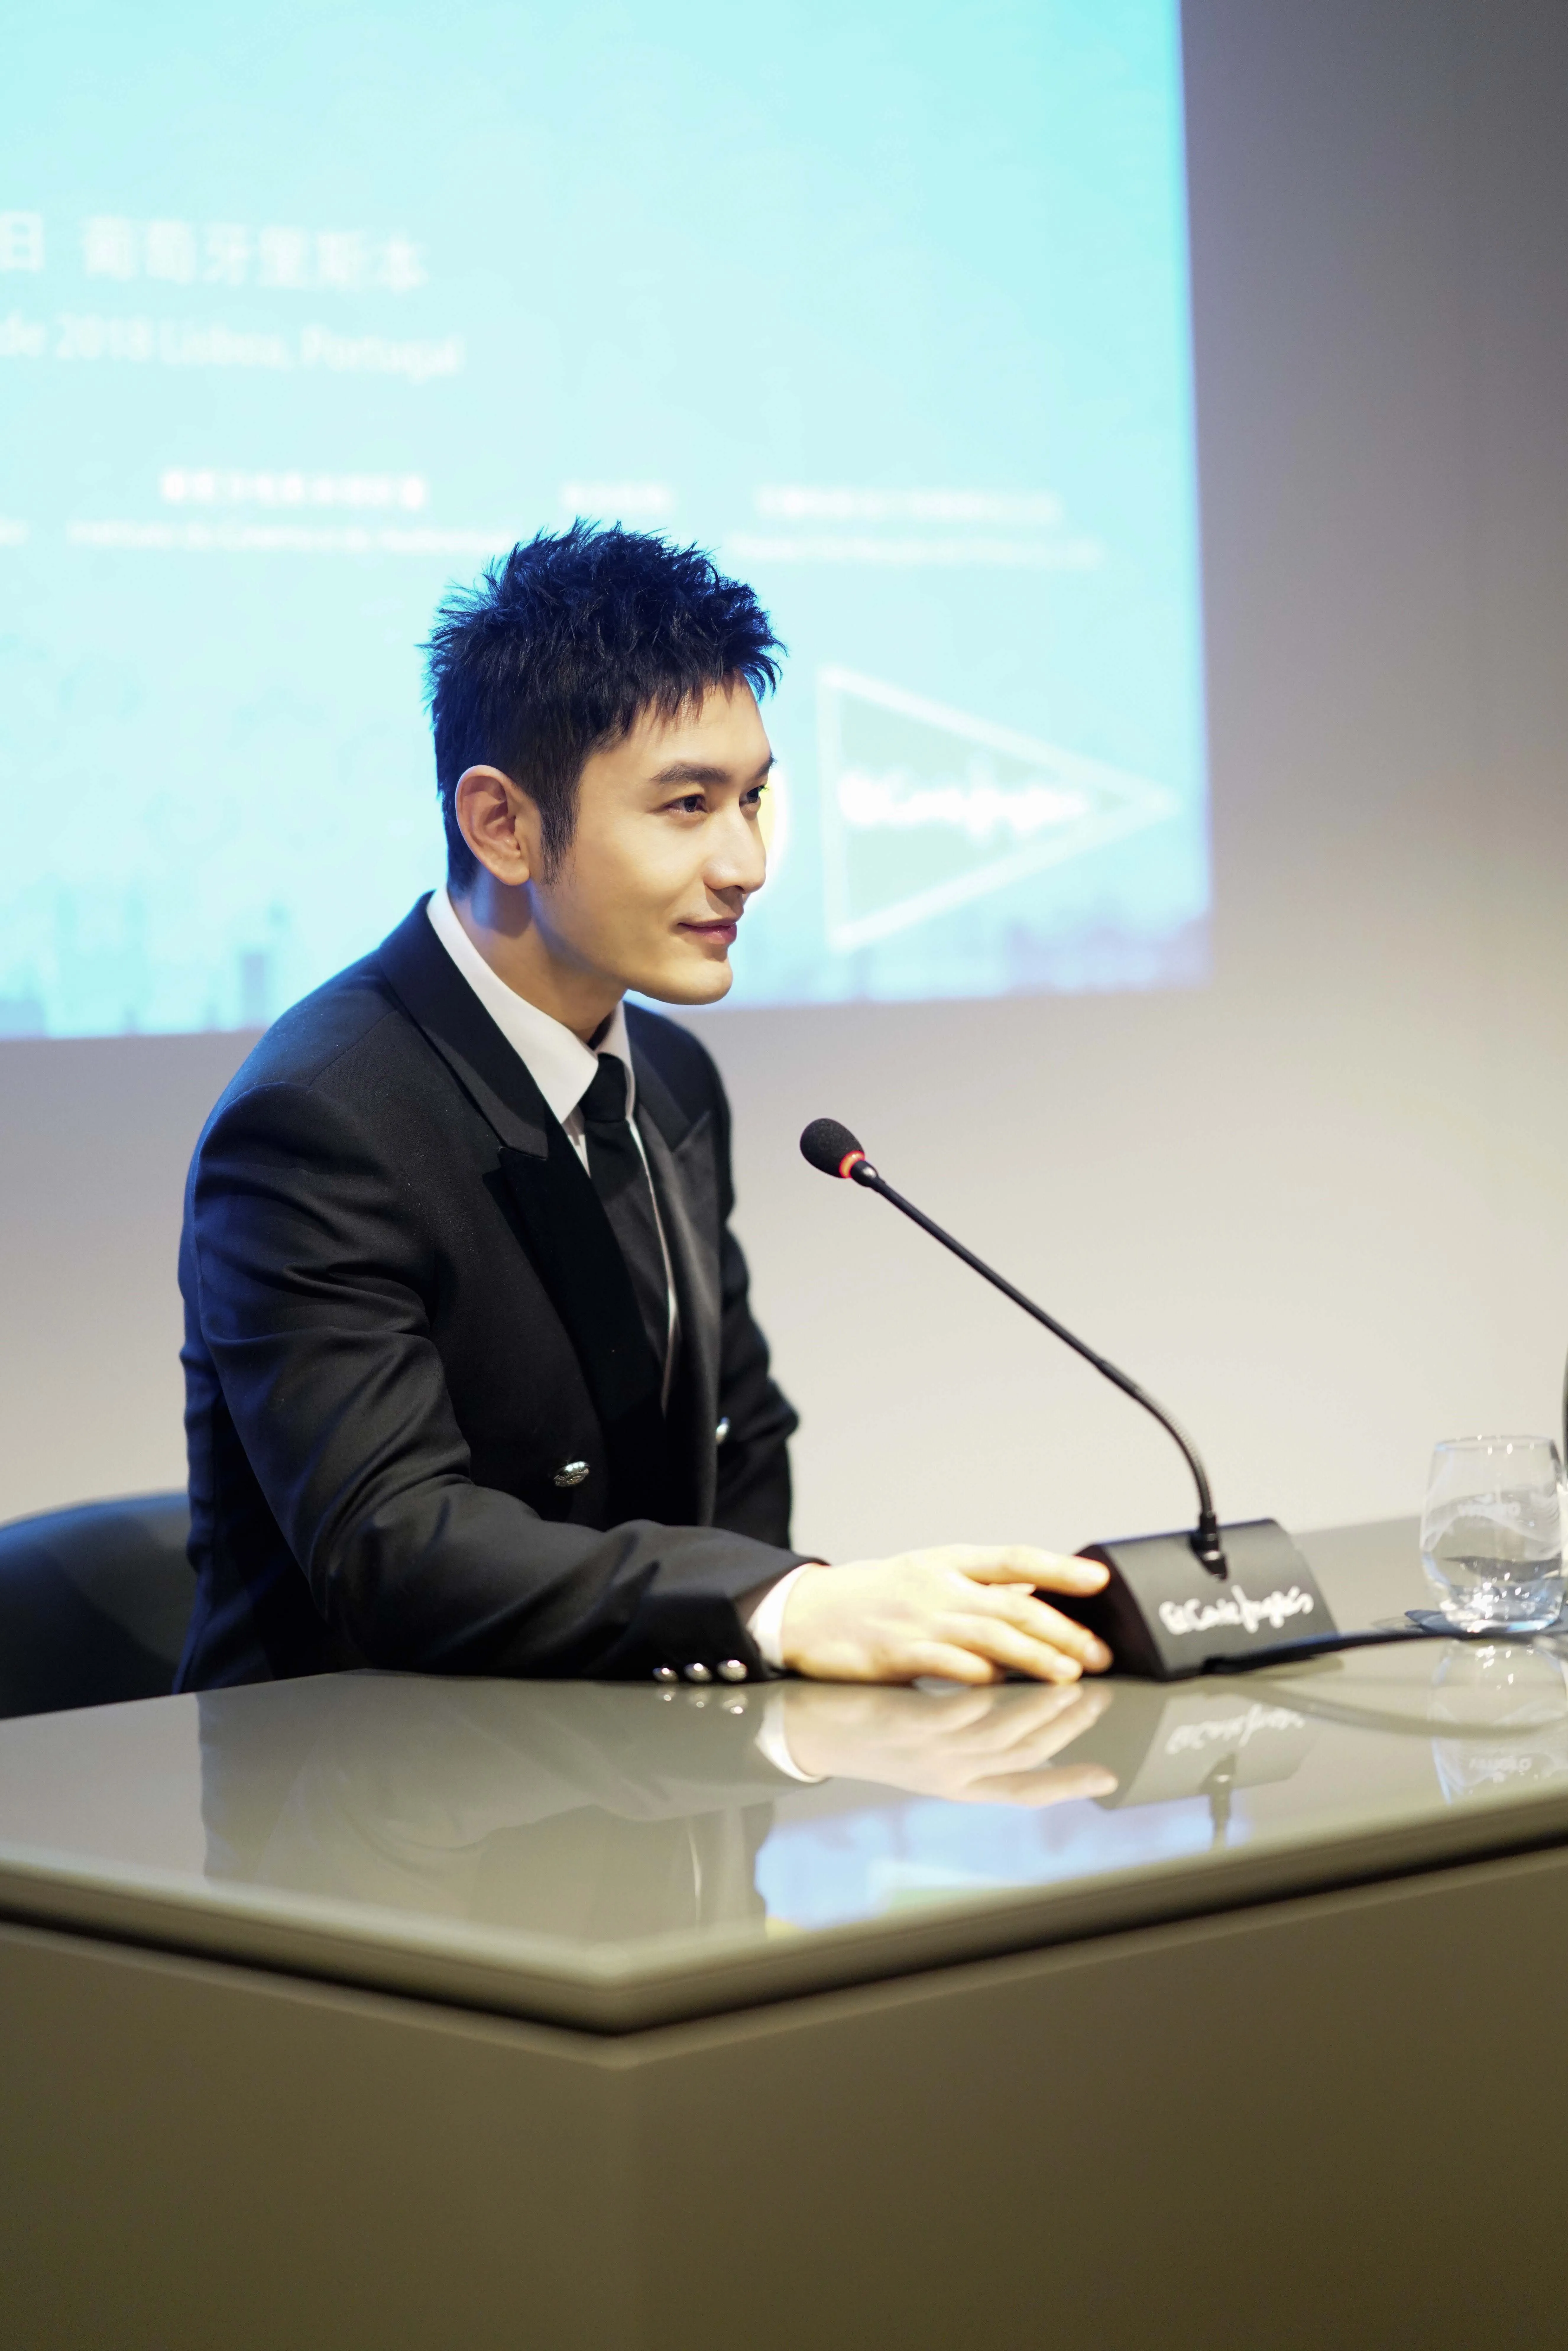 Chinese and Portuguese film culture exchange week opens - Xiaoming Huang told media. JPG